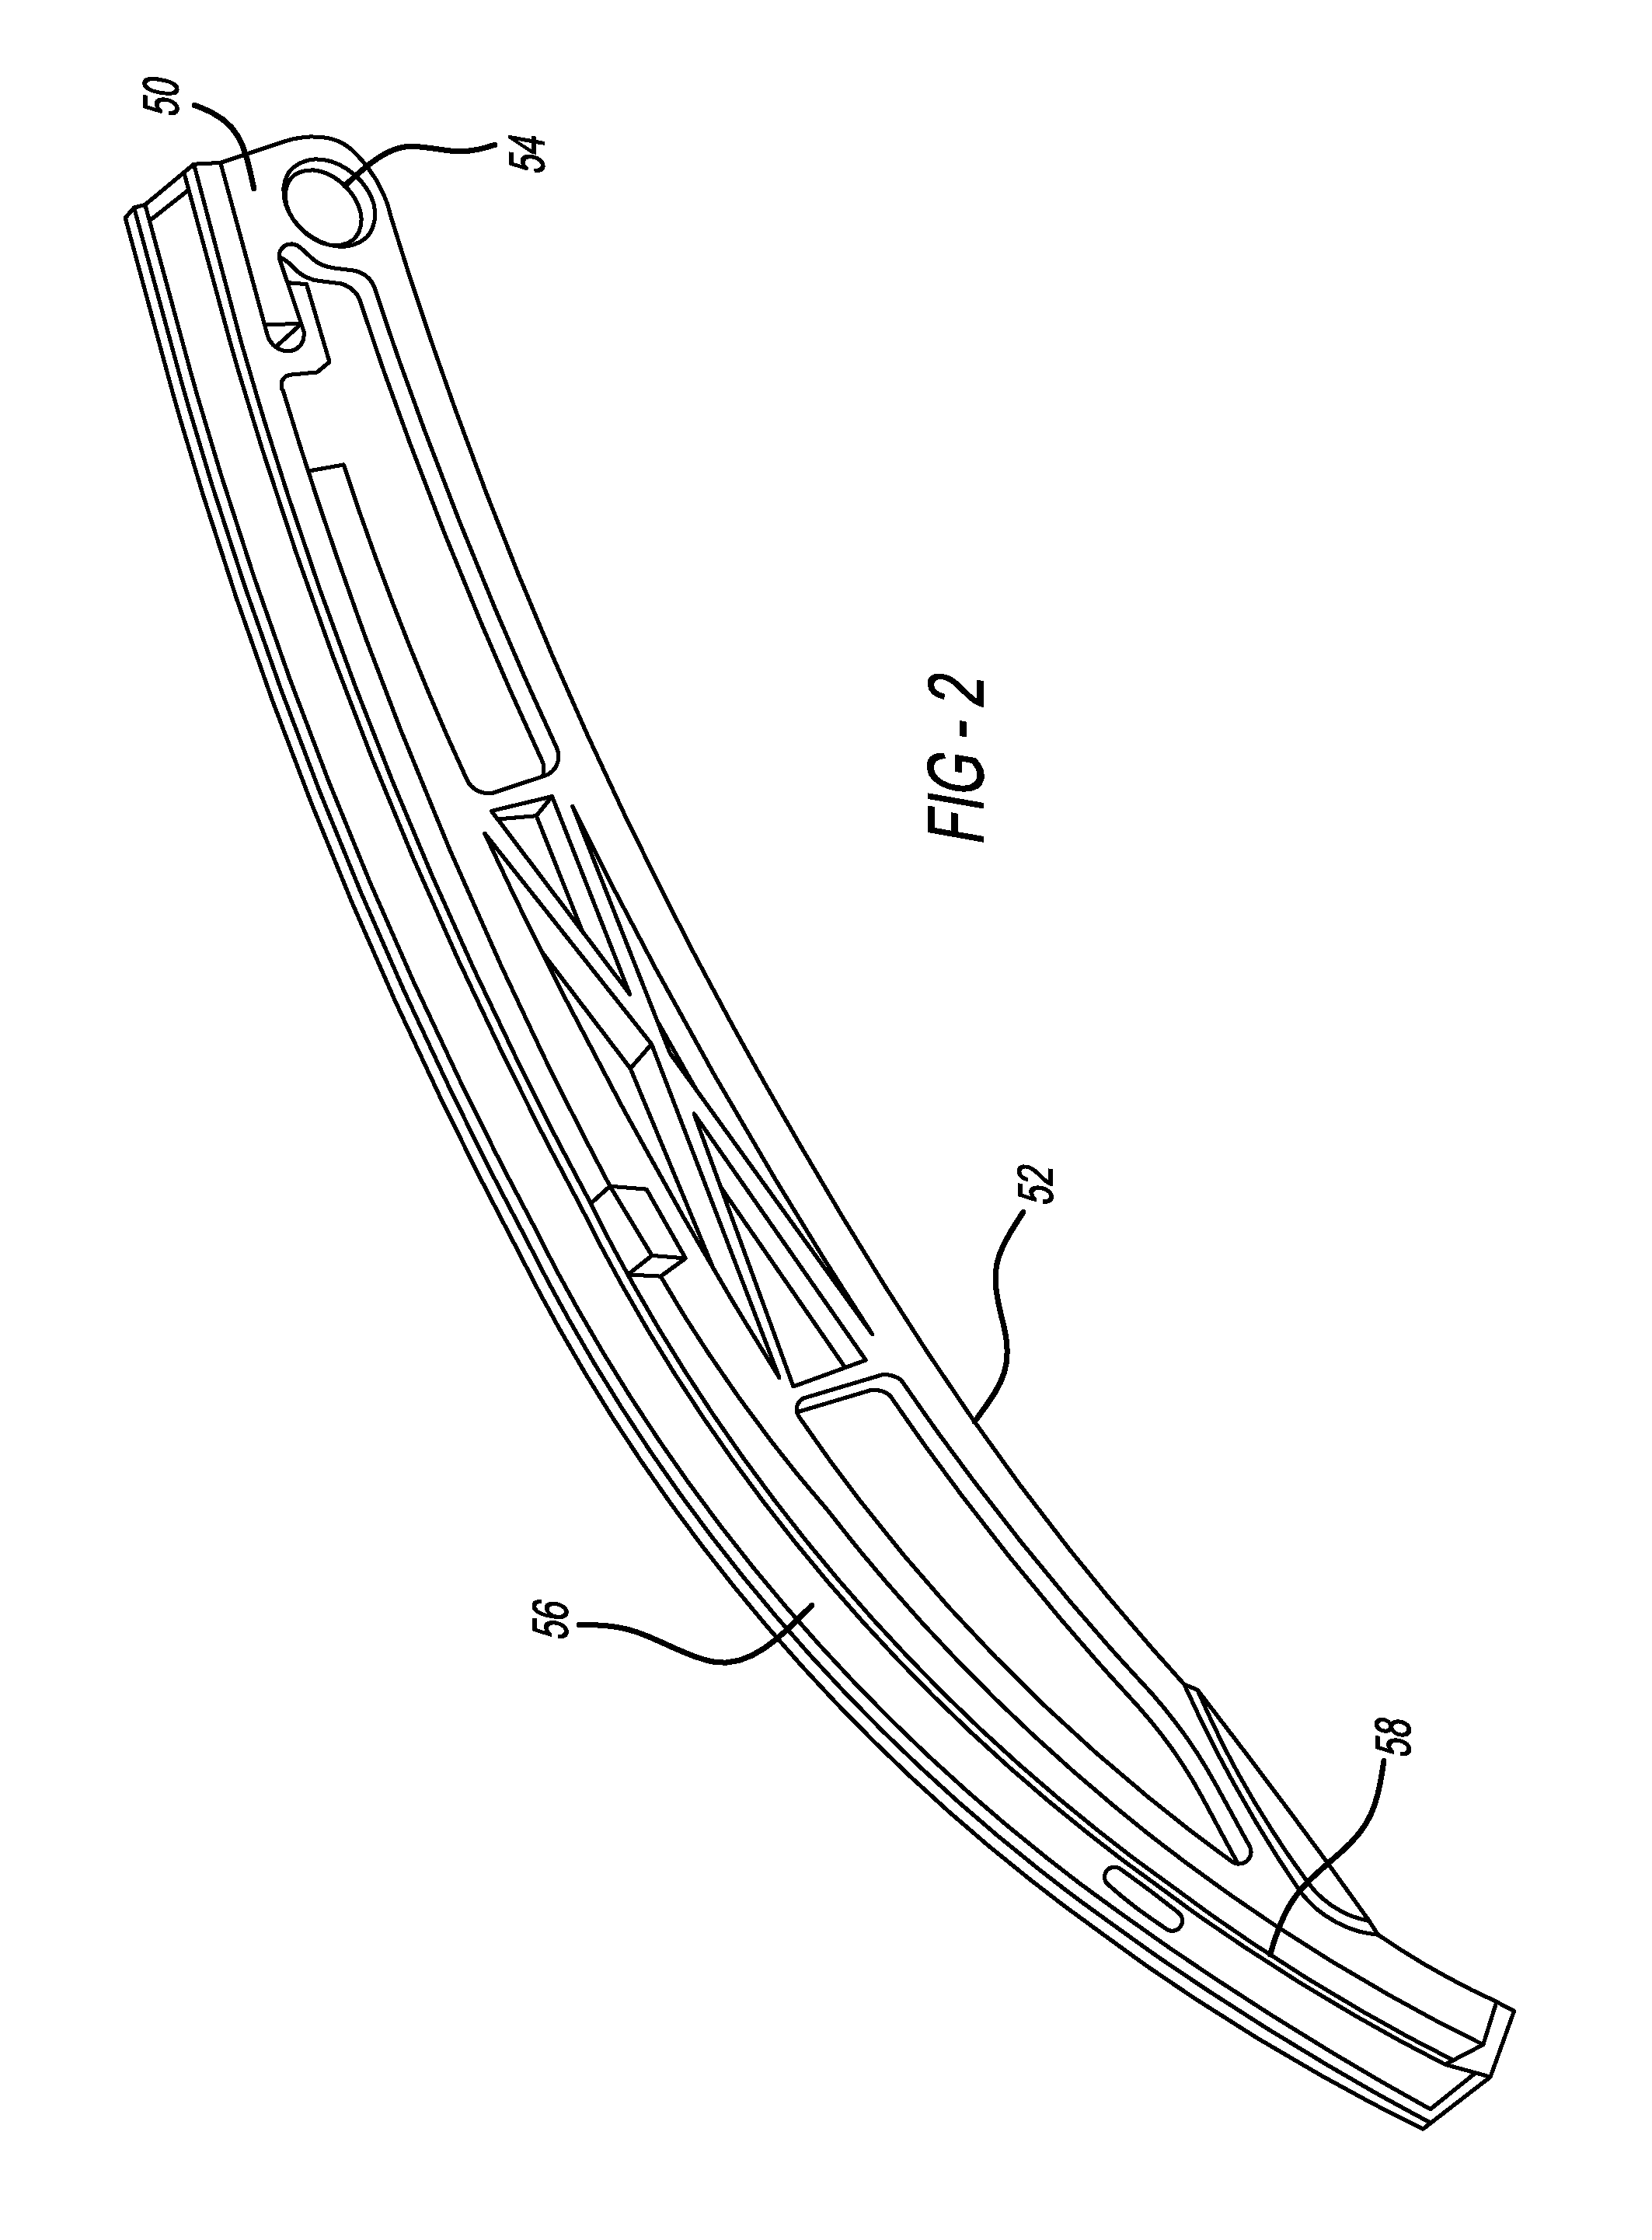 Diamond-like carbon coating on chain guides and tensioning arms for internal combustion engines